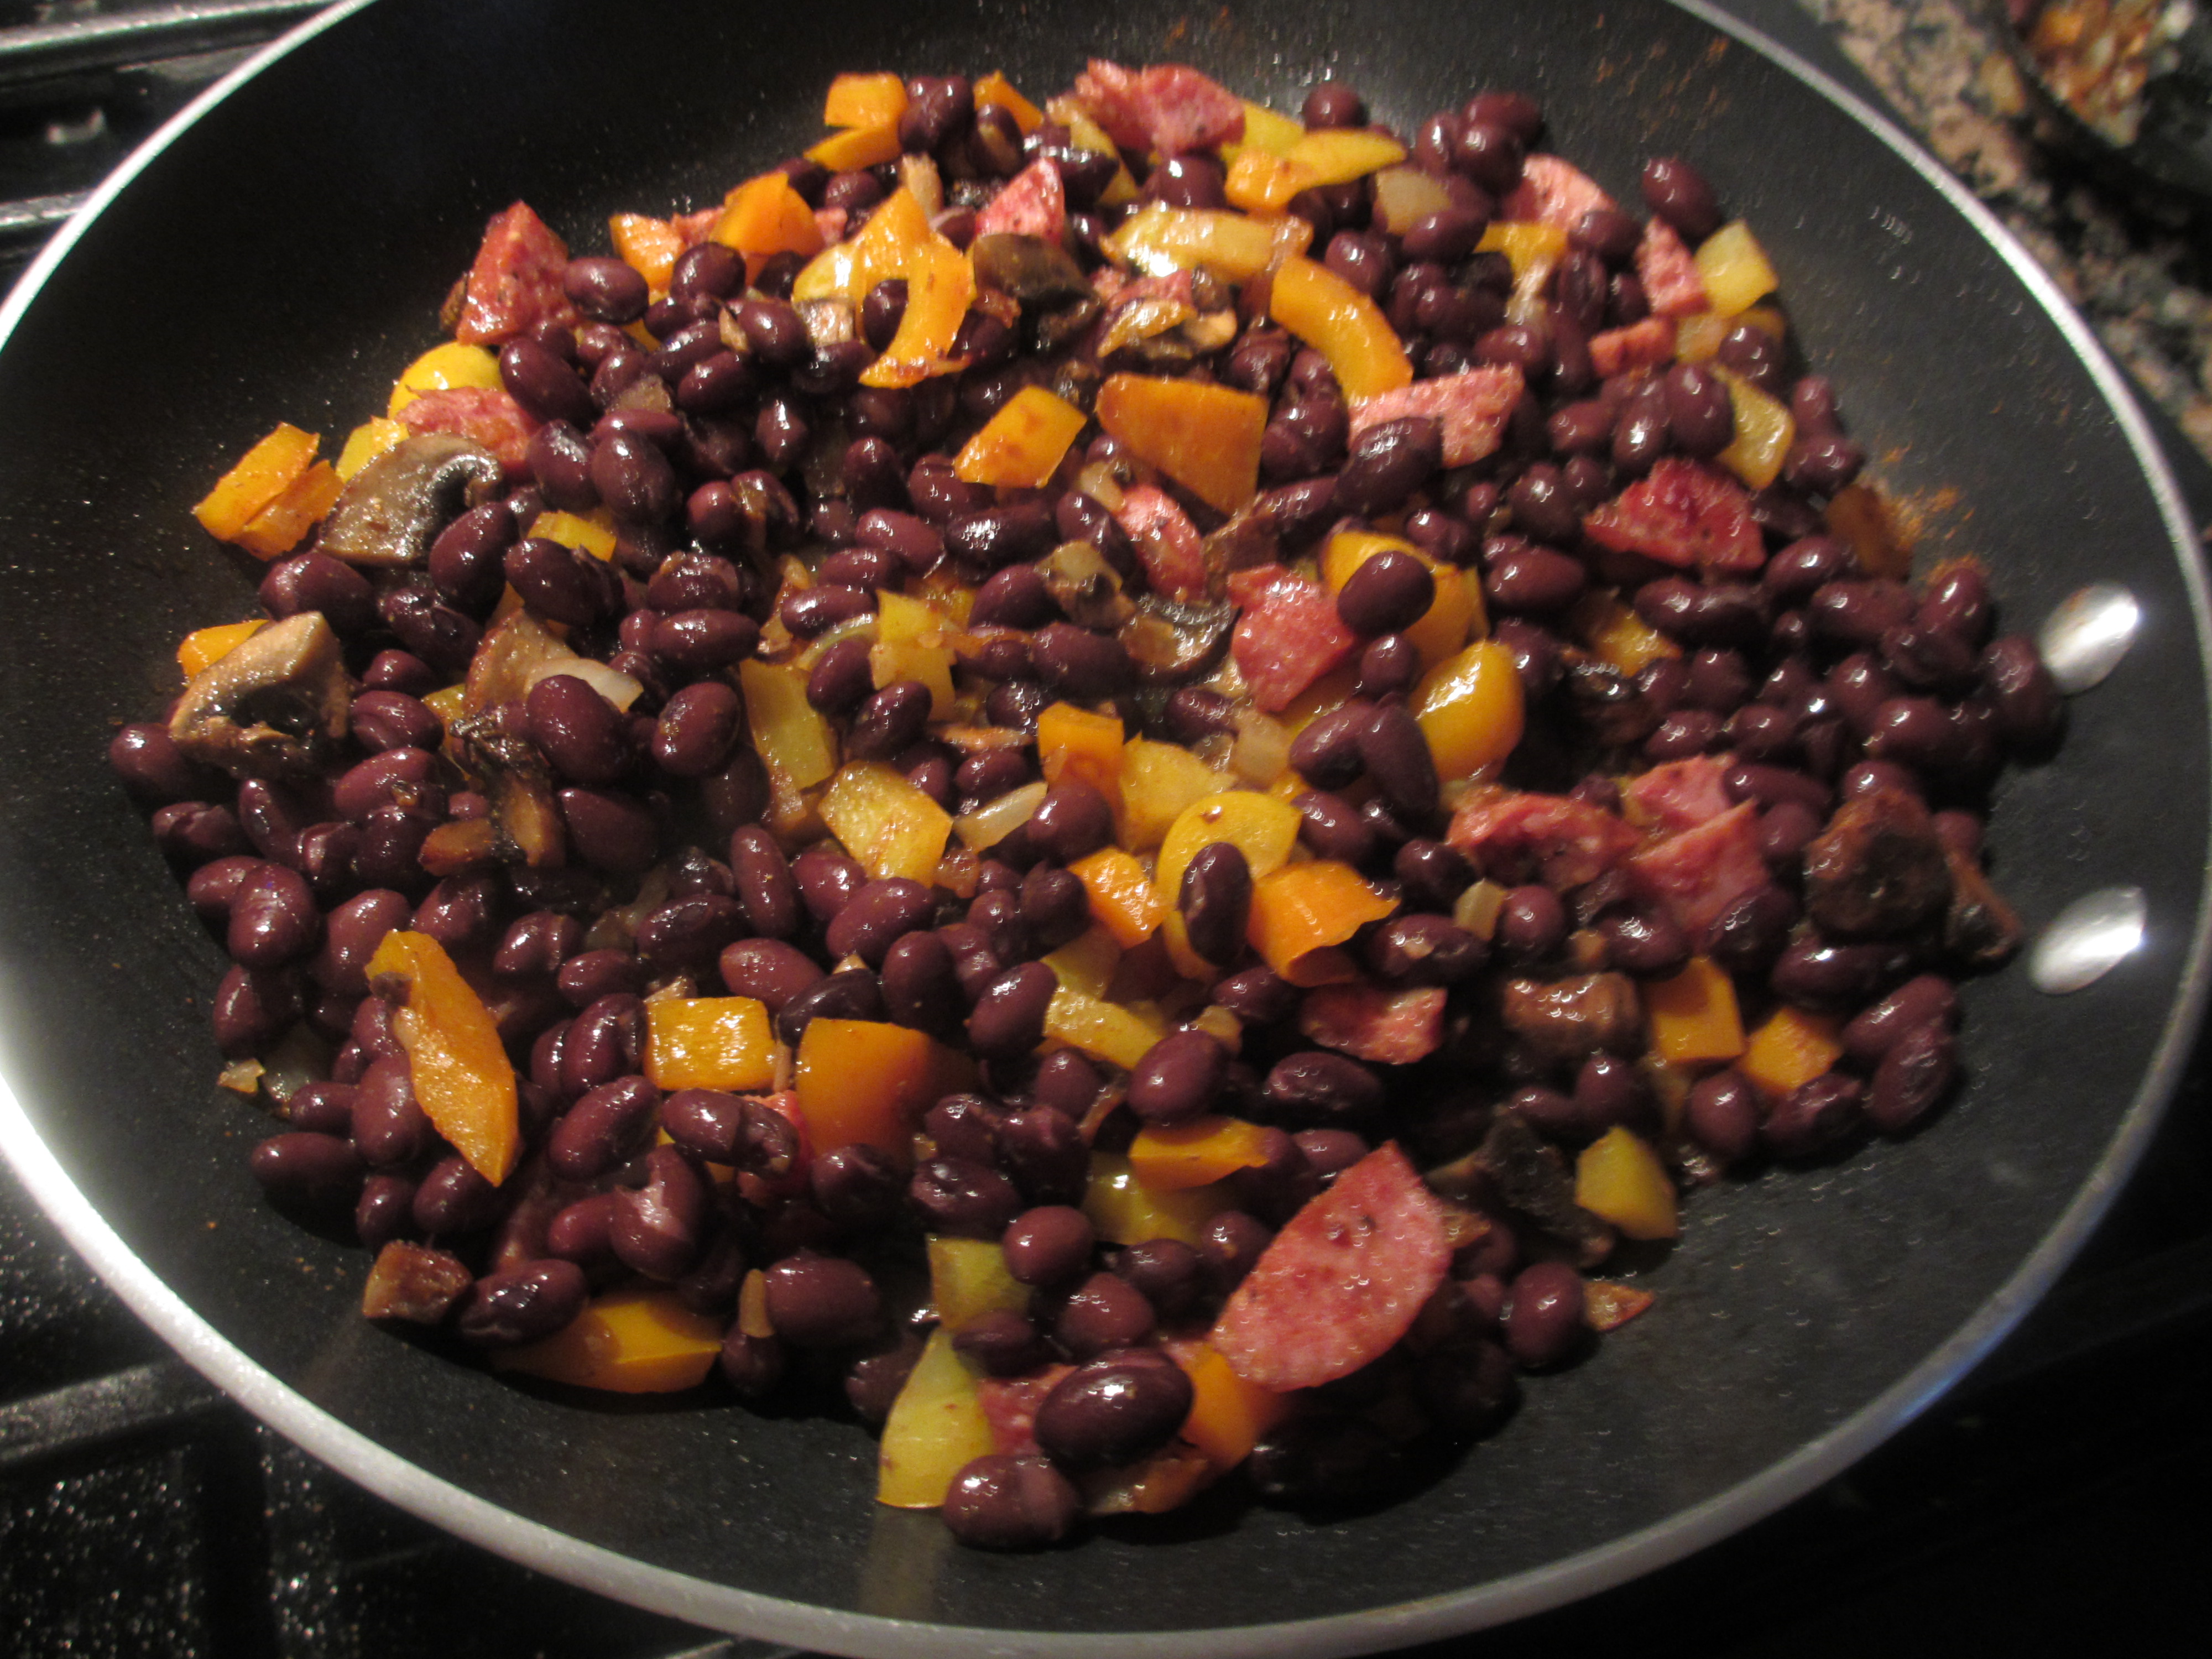 Chopped color peppers with sausage and black beans